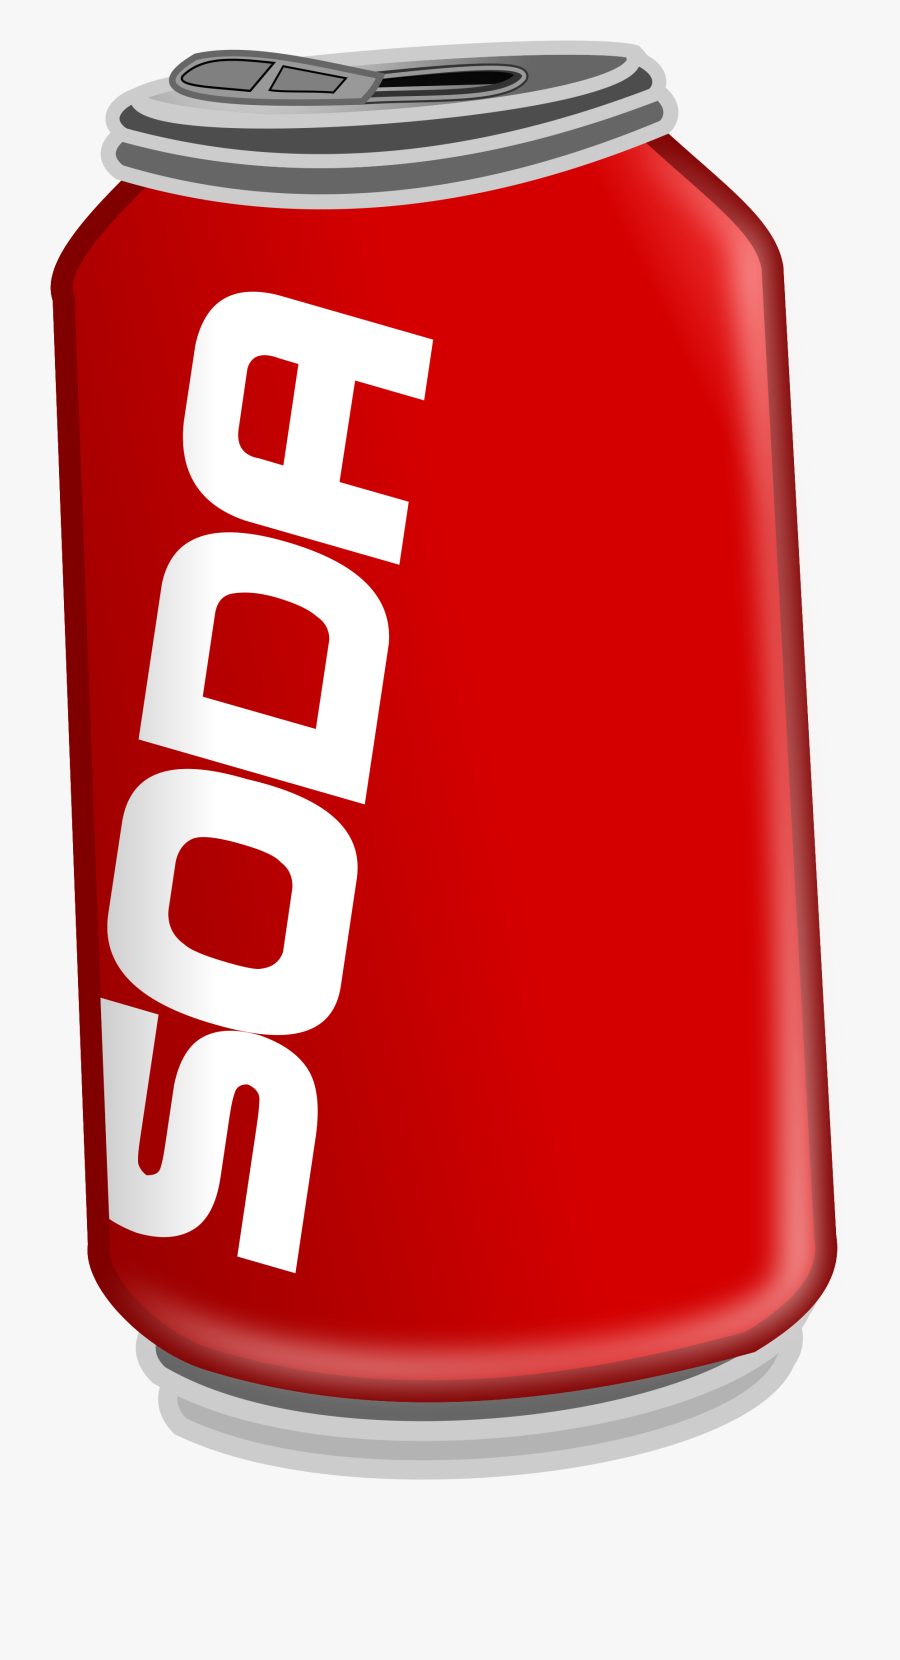 Soft Drink Image - Soft Drinks Icon Png, Transparent Clipart